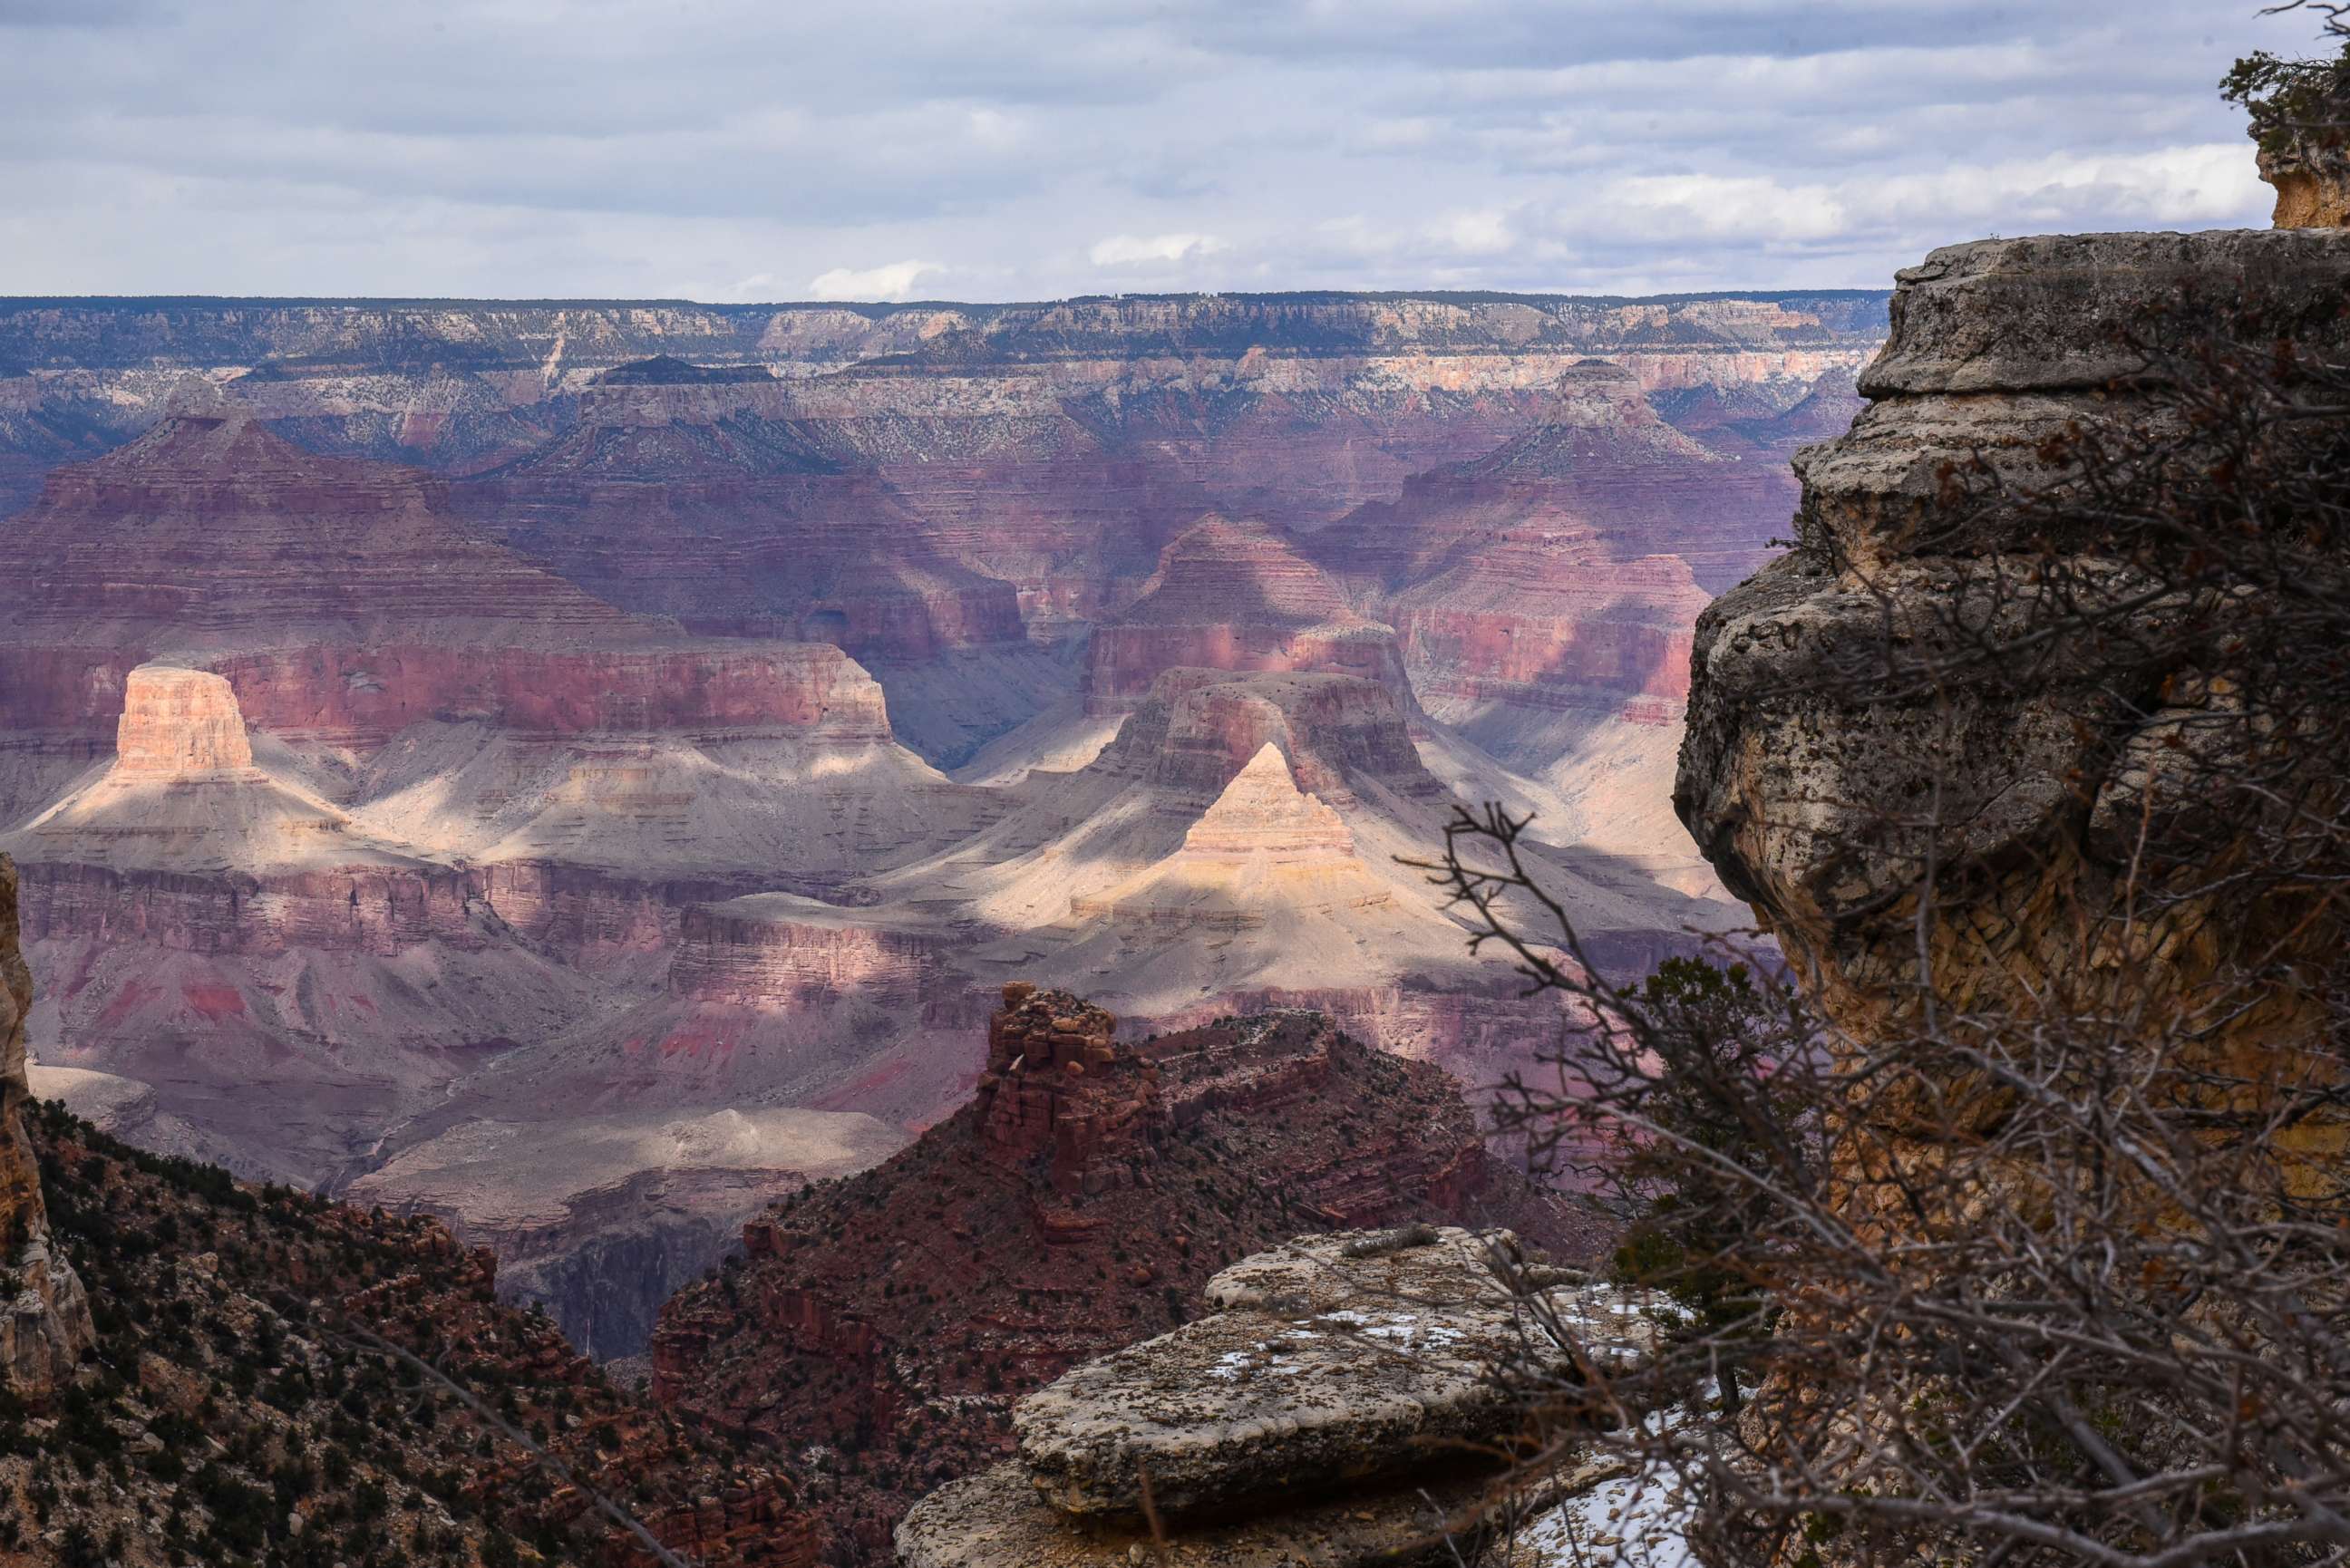 PHOTO: The Grand Canyon is seen from the South Rim near Grand Canyon Village, Arizona, on Feb. 22, 2018.